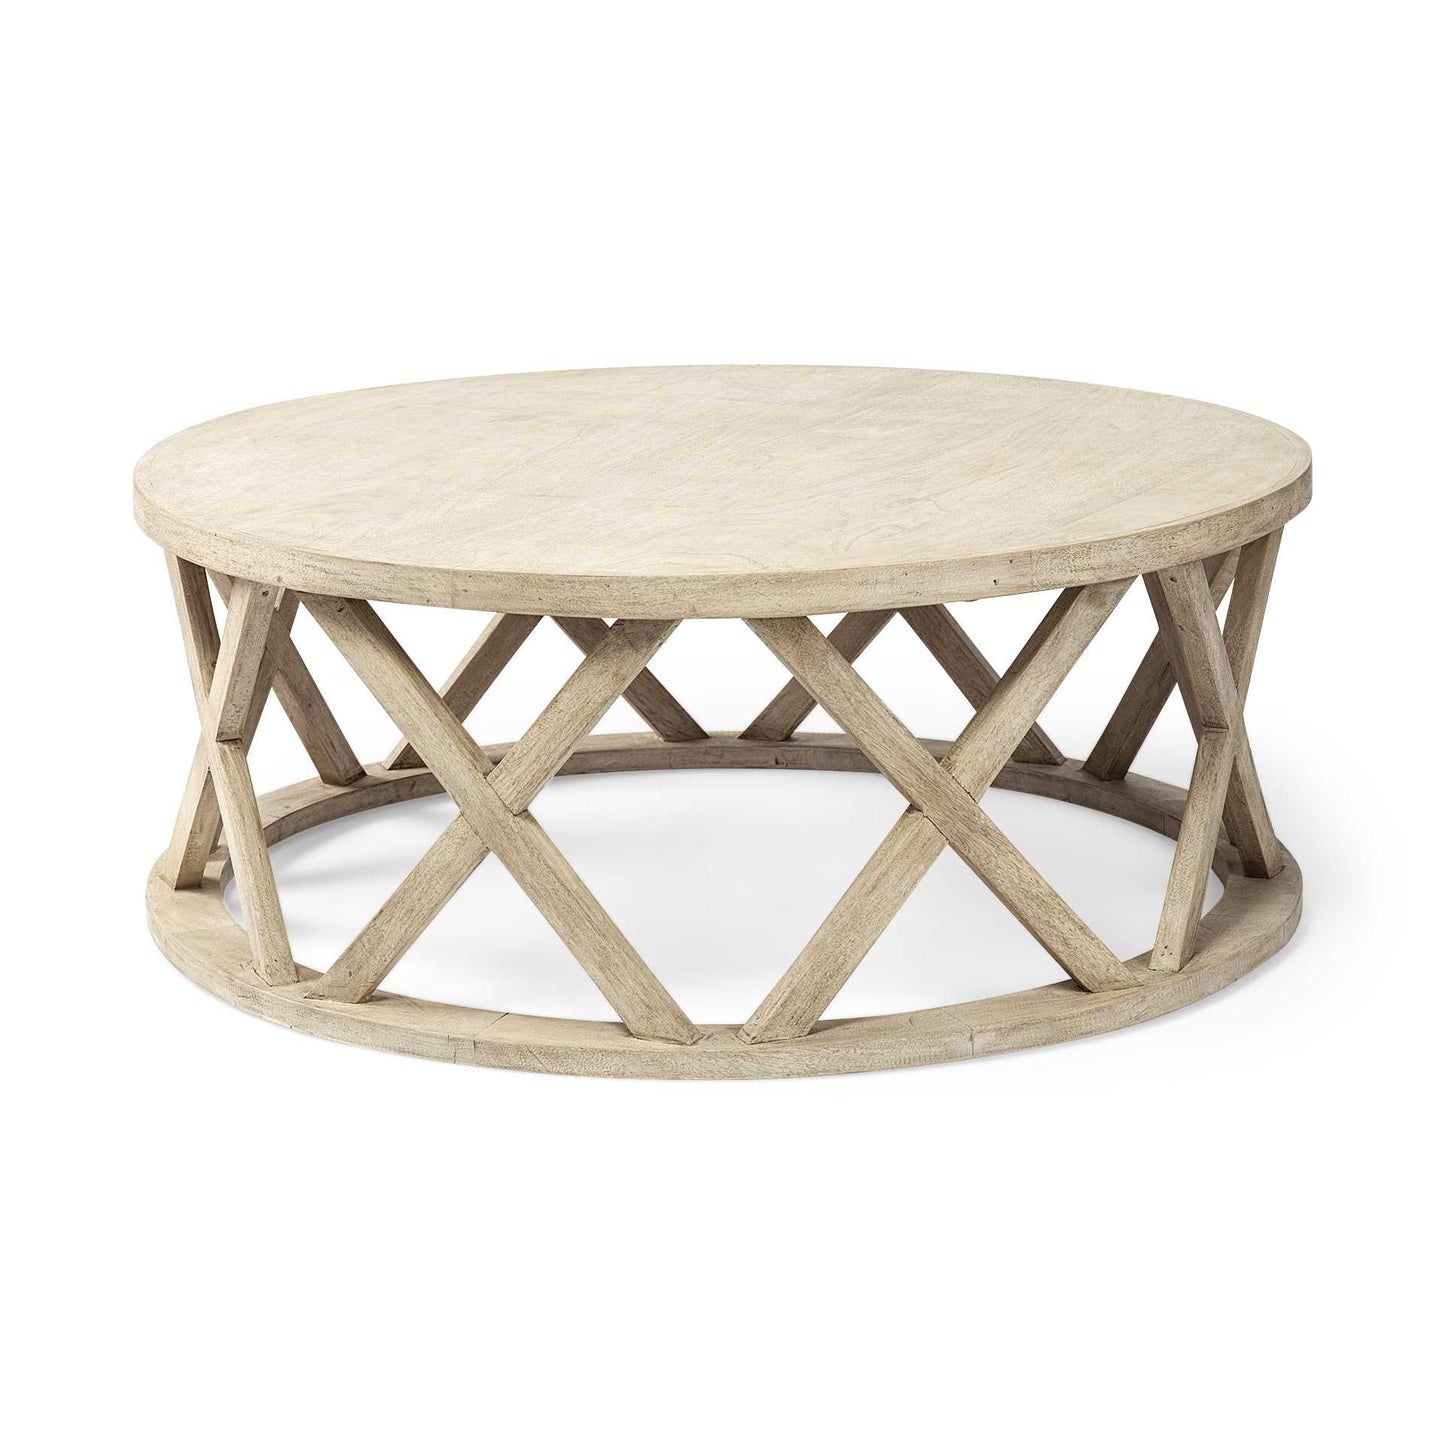 46" White Solid Wood Round Coffee Table